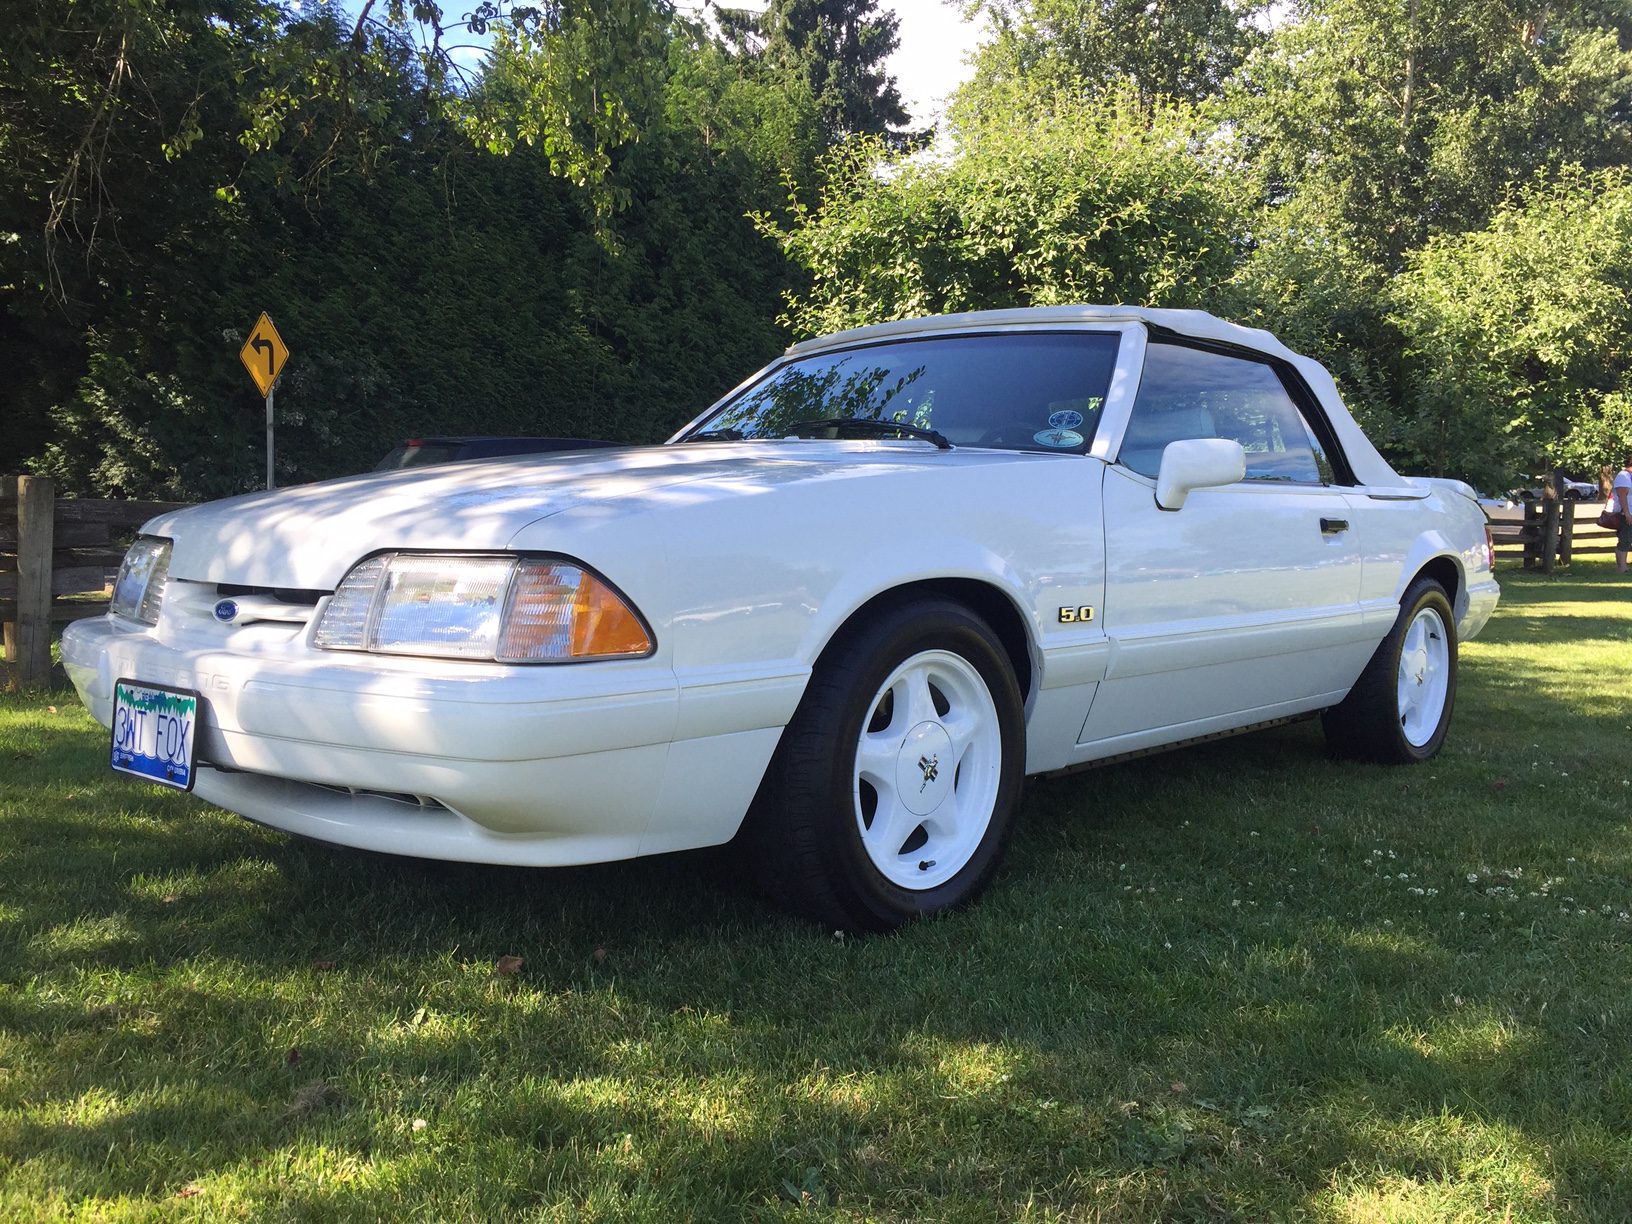 For sale: 1993 Ford Mustang Triple White Feature Car/Automatic/38k miles